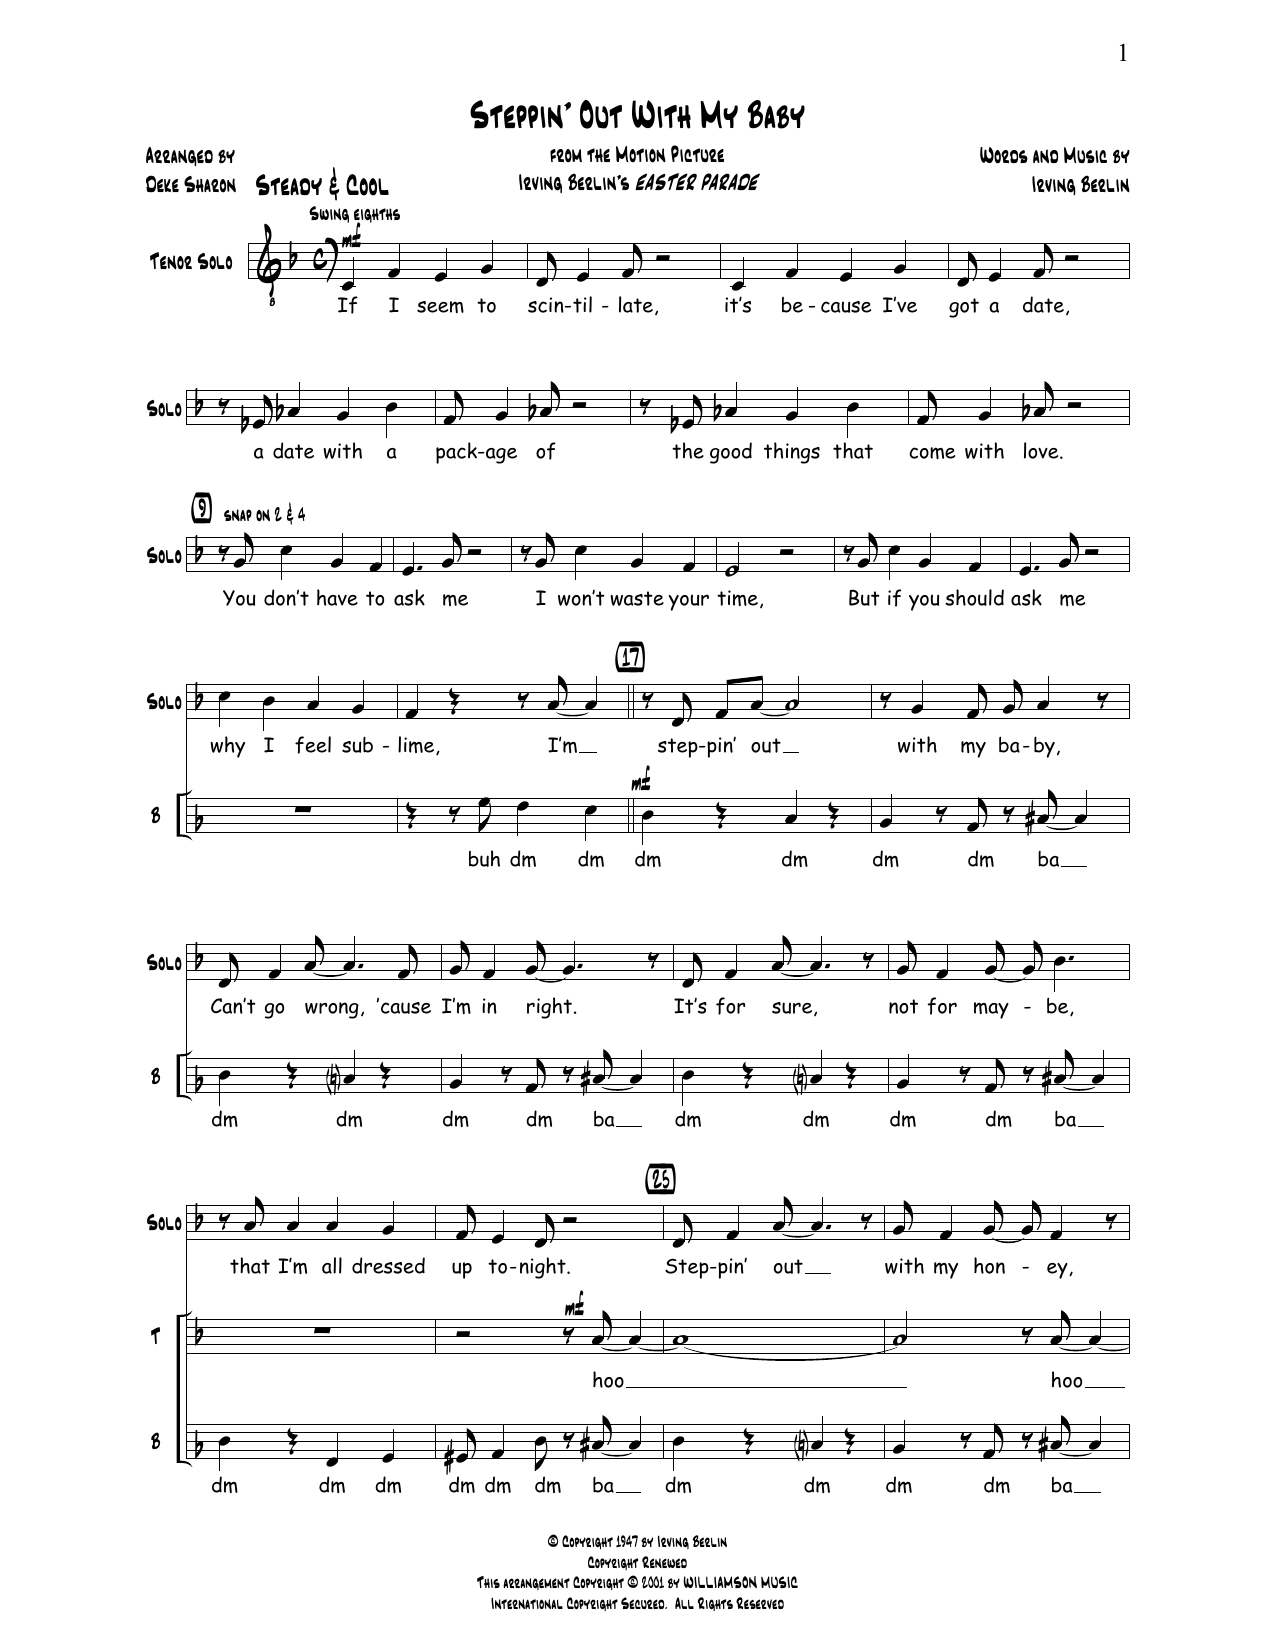 Download Deke Sharon Steppin' Out With My Baby Sheet Music